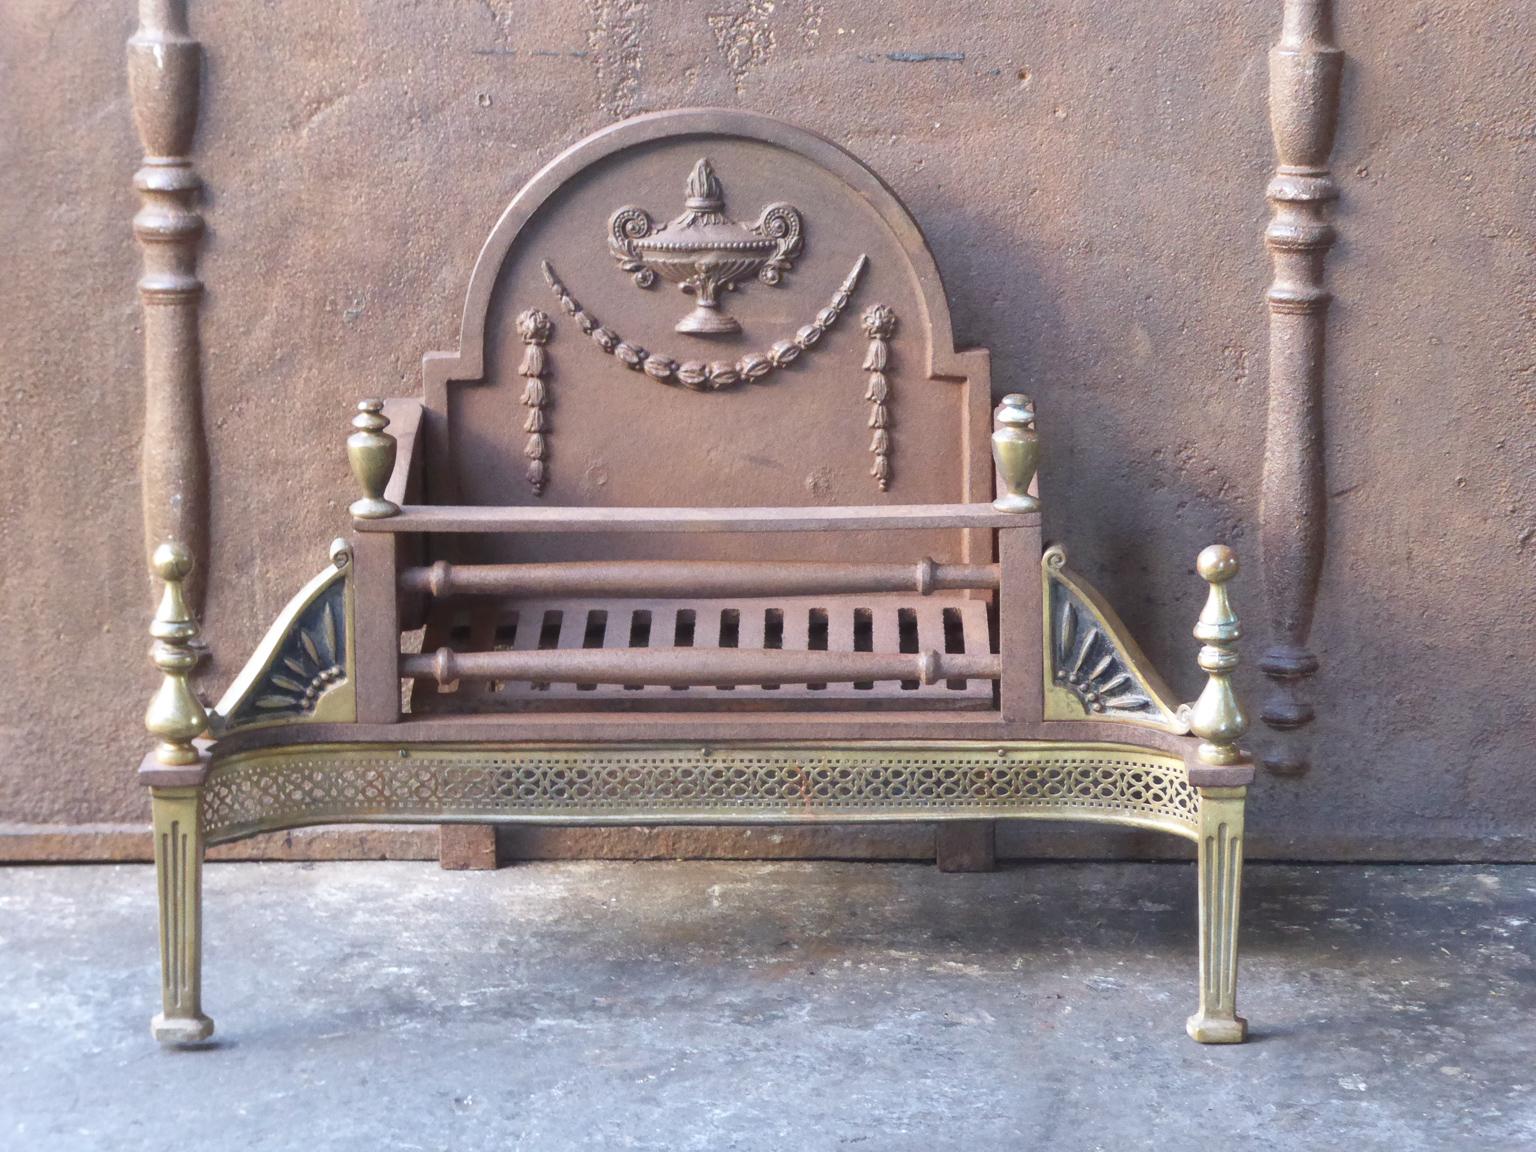 English Victorian style fireplace basket or fire basket. The fireplace grate is made of wrought iron, cast iron and brass. The total width of the front of the grate is 27 inch (68 cm).

















 